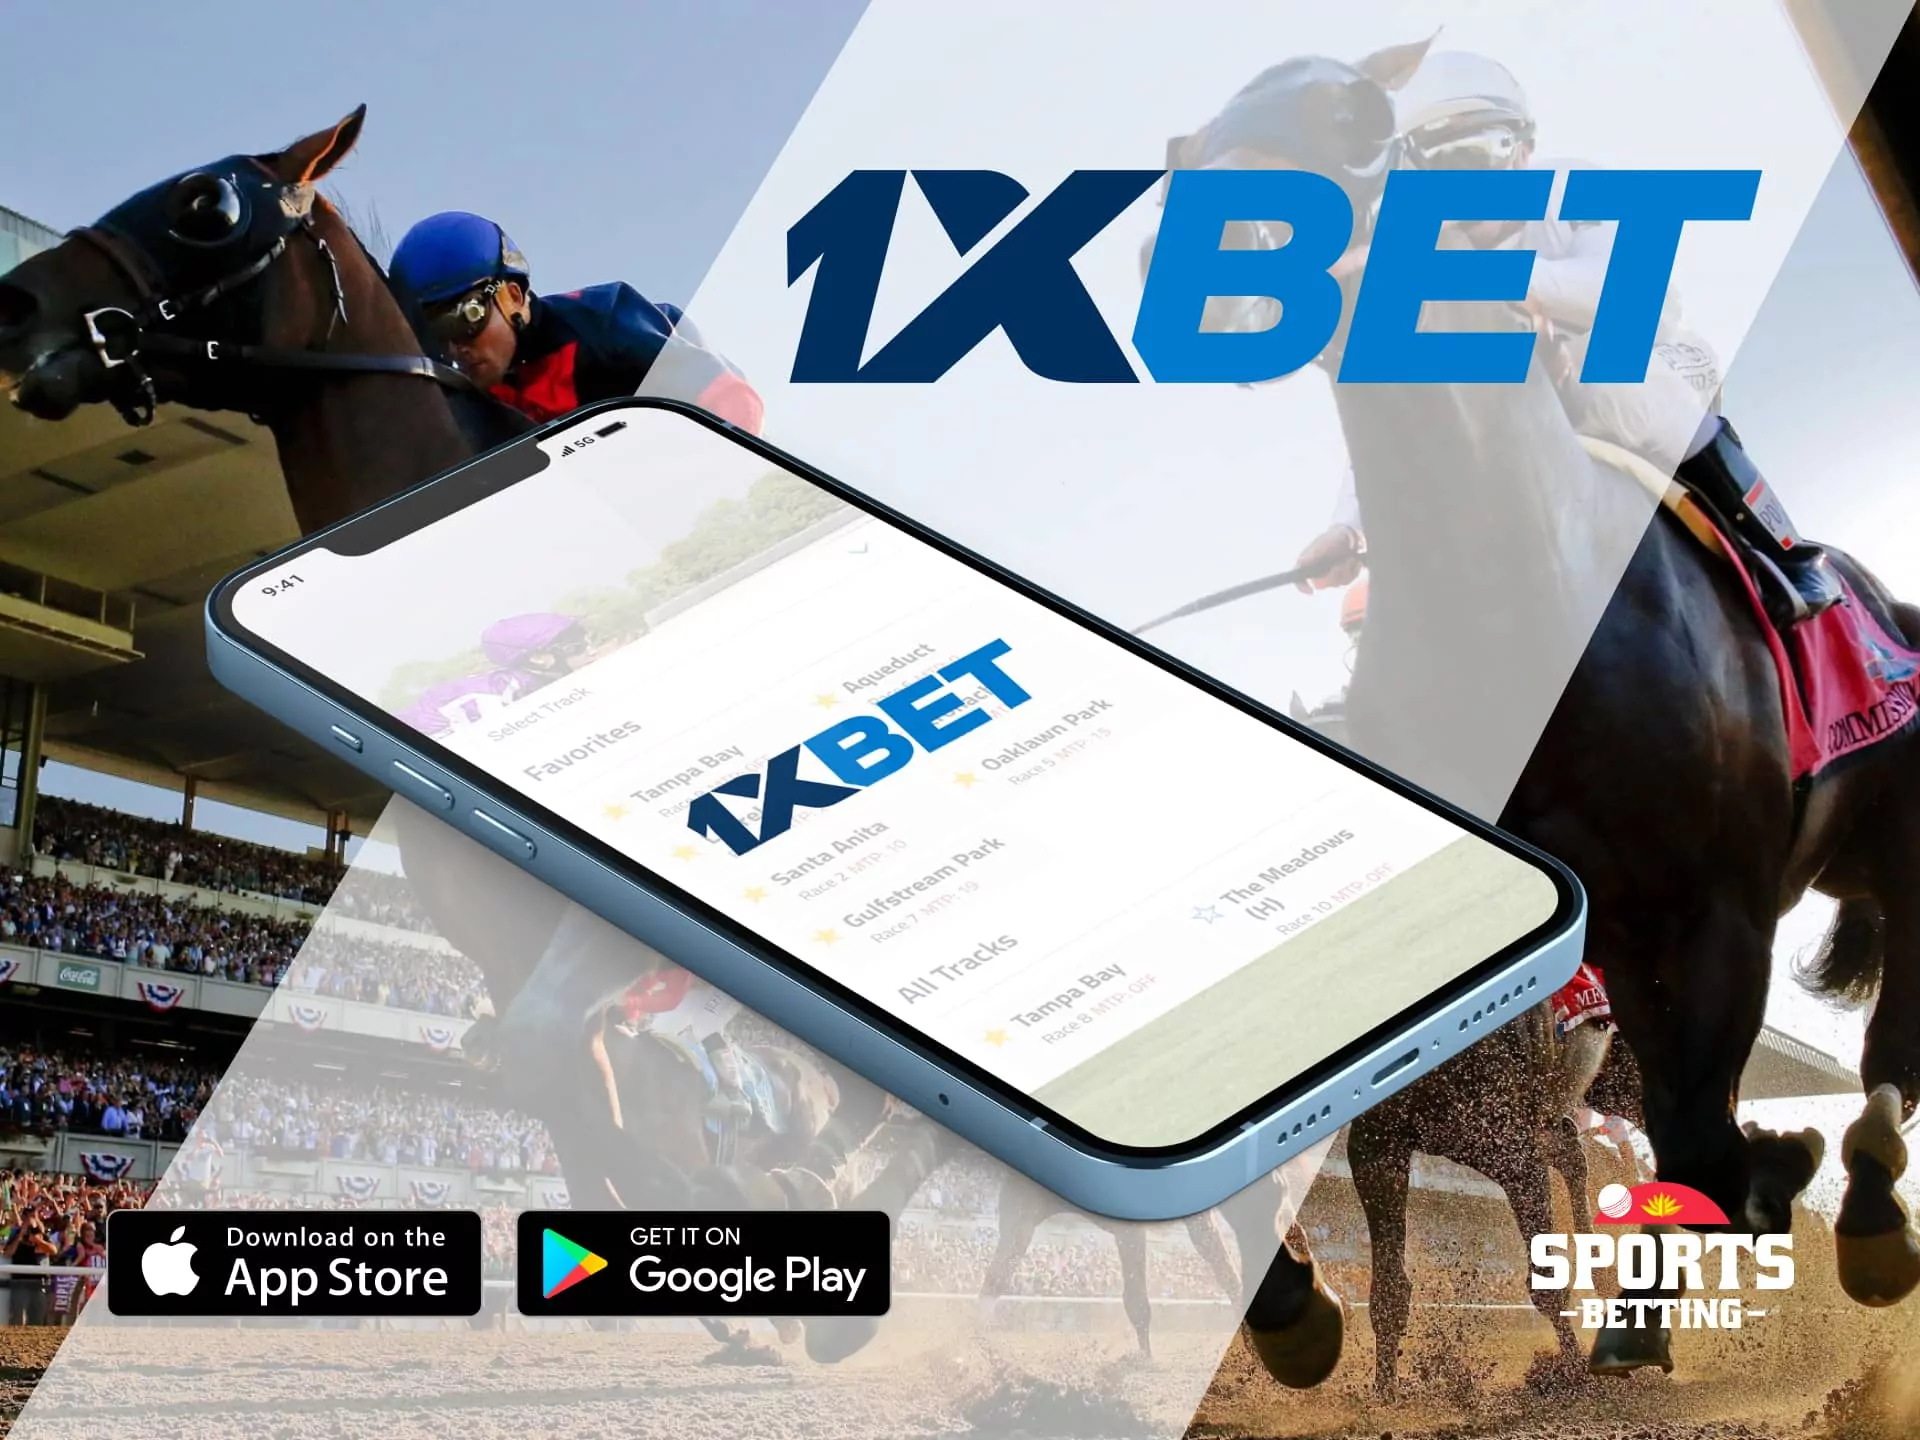 1xBet horse racing betting site with highly competitive odds.